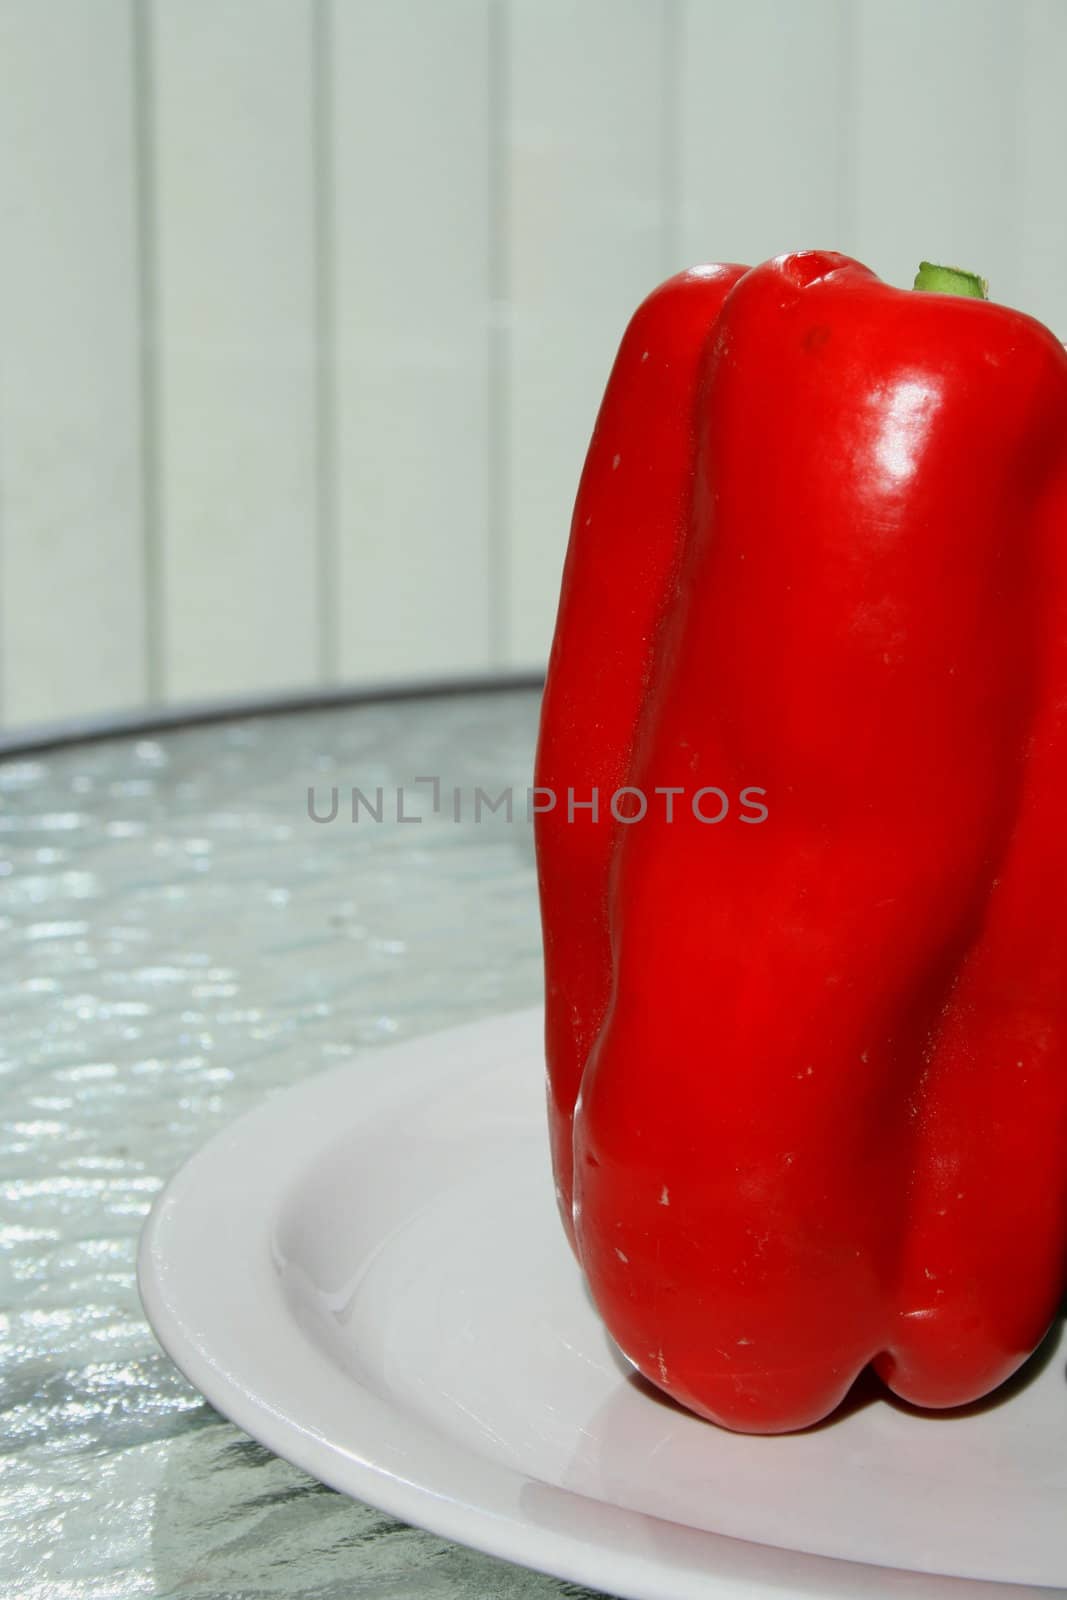 Close up of a red bell pepper on a plate.
